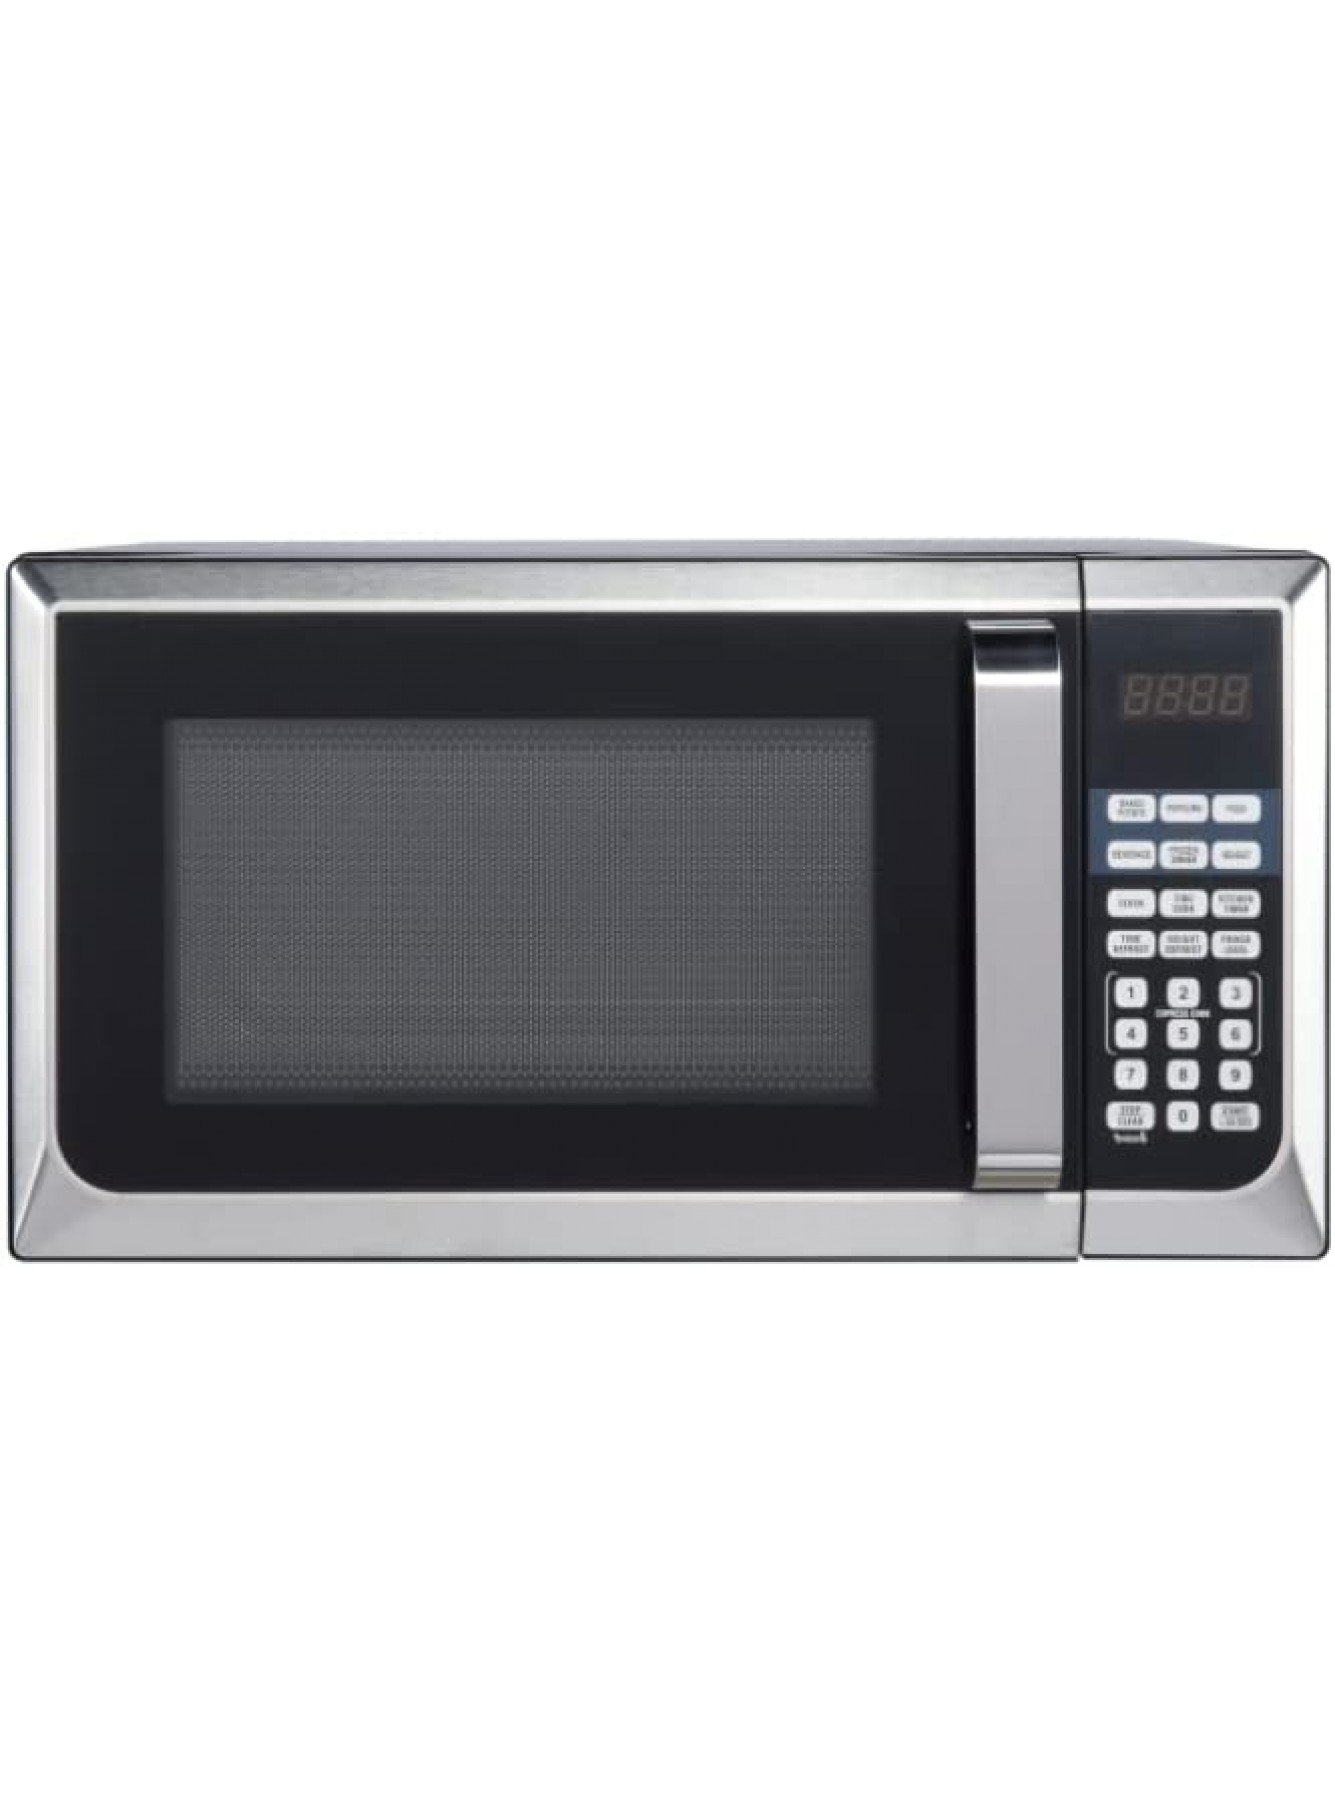 0.9 Cu. Ft. Stainless Steel Countertop Microwave Oven B09ZTJPVML